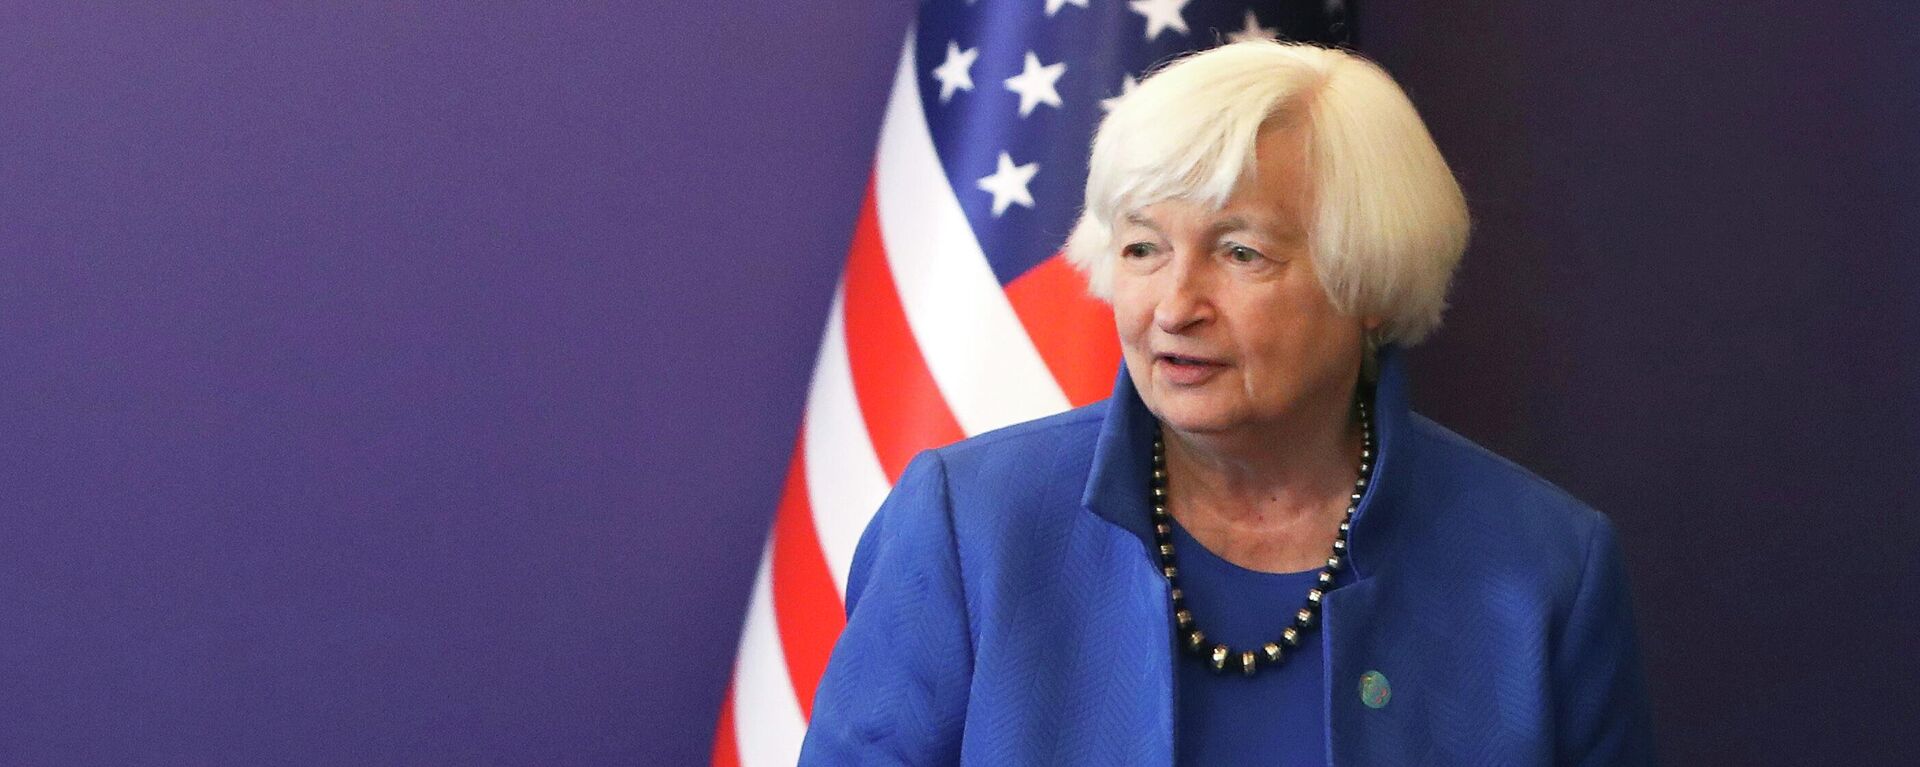 U.S. Treasury Secretary Janet Yellen attends a meeting with South Korean Deputy Prime Minister and Minister of Economy and Finance Choo Kyung-ho at Lotte Hotel in Seoul, South Korea, Tuesday, July 19, 2022 - Sputnik International, 1920, 20.01.2023